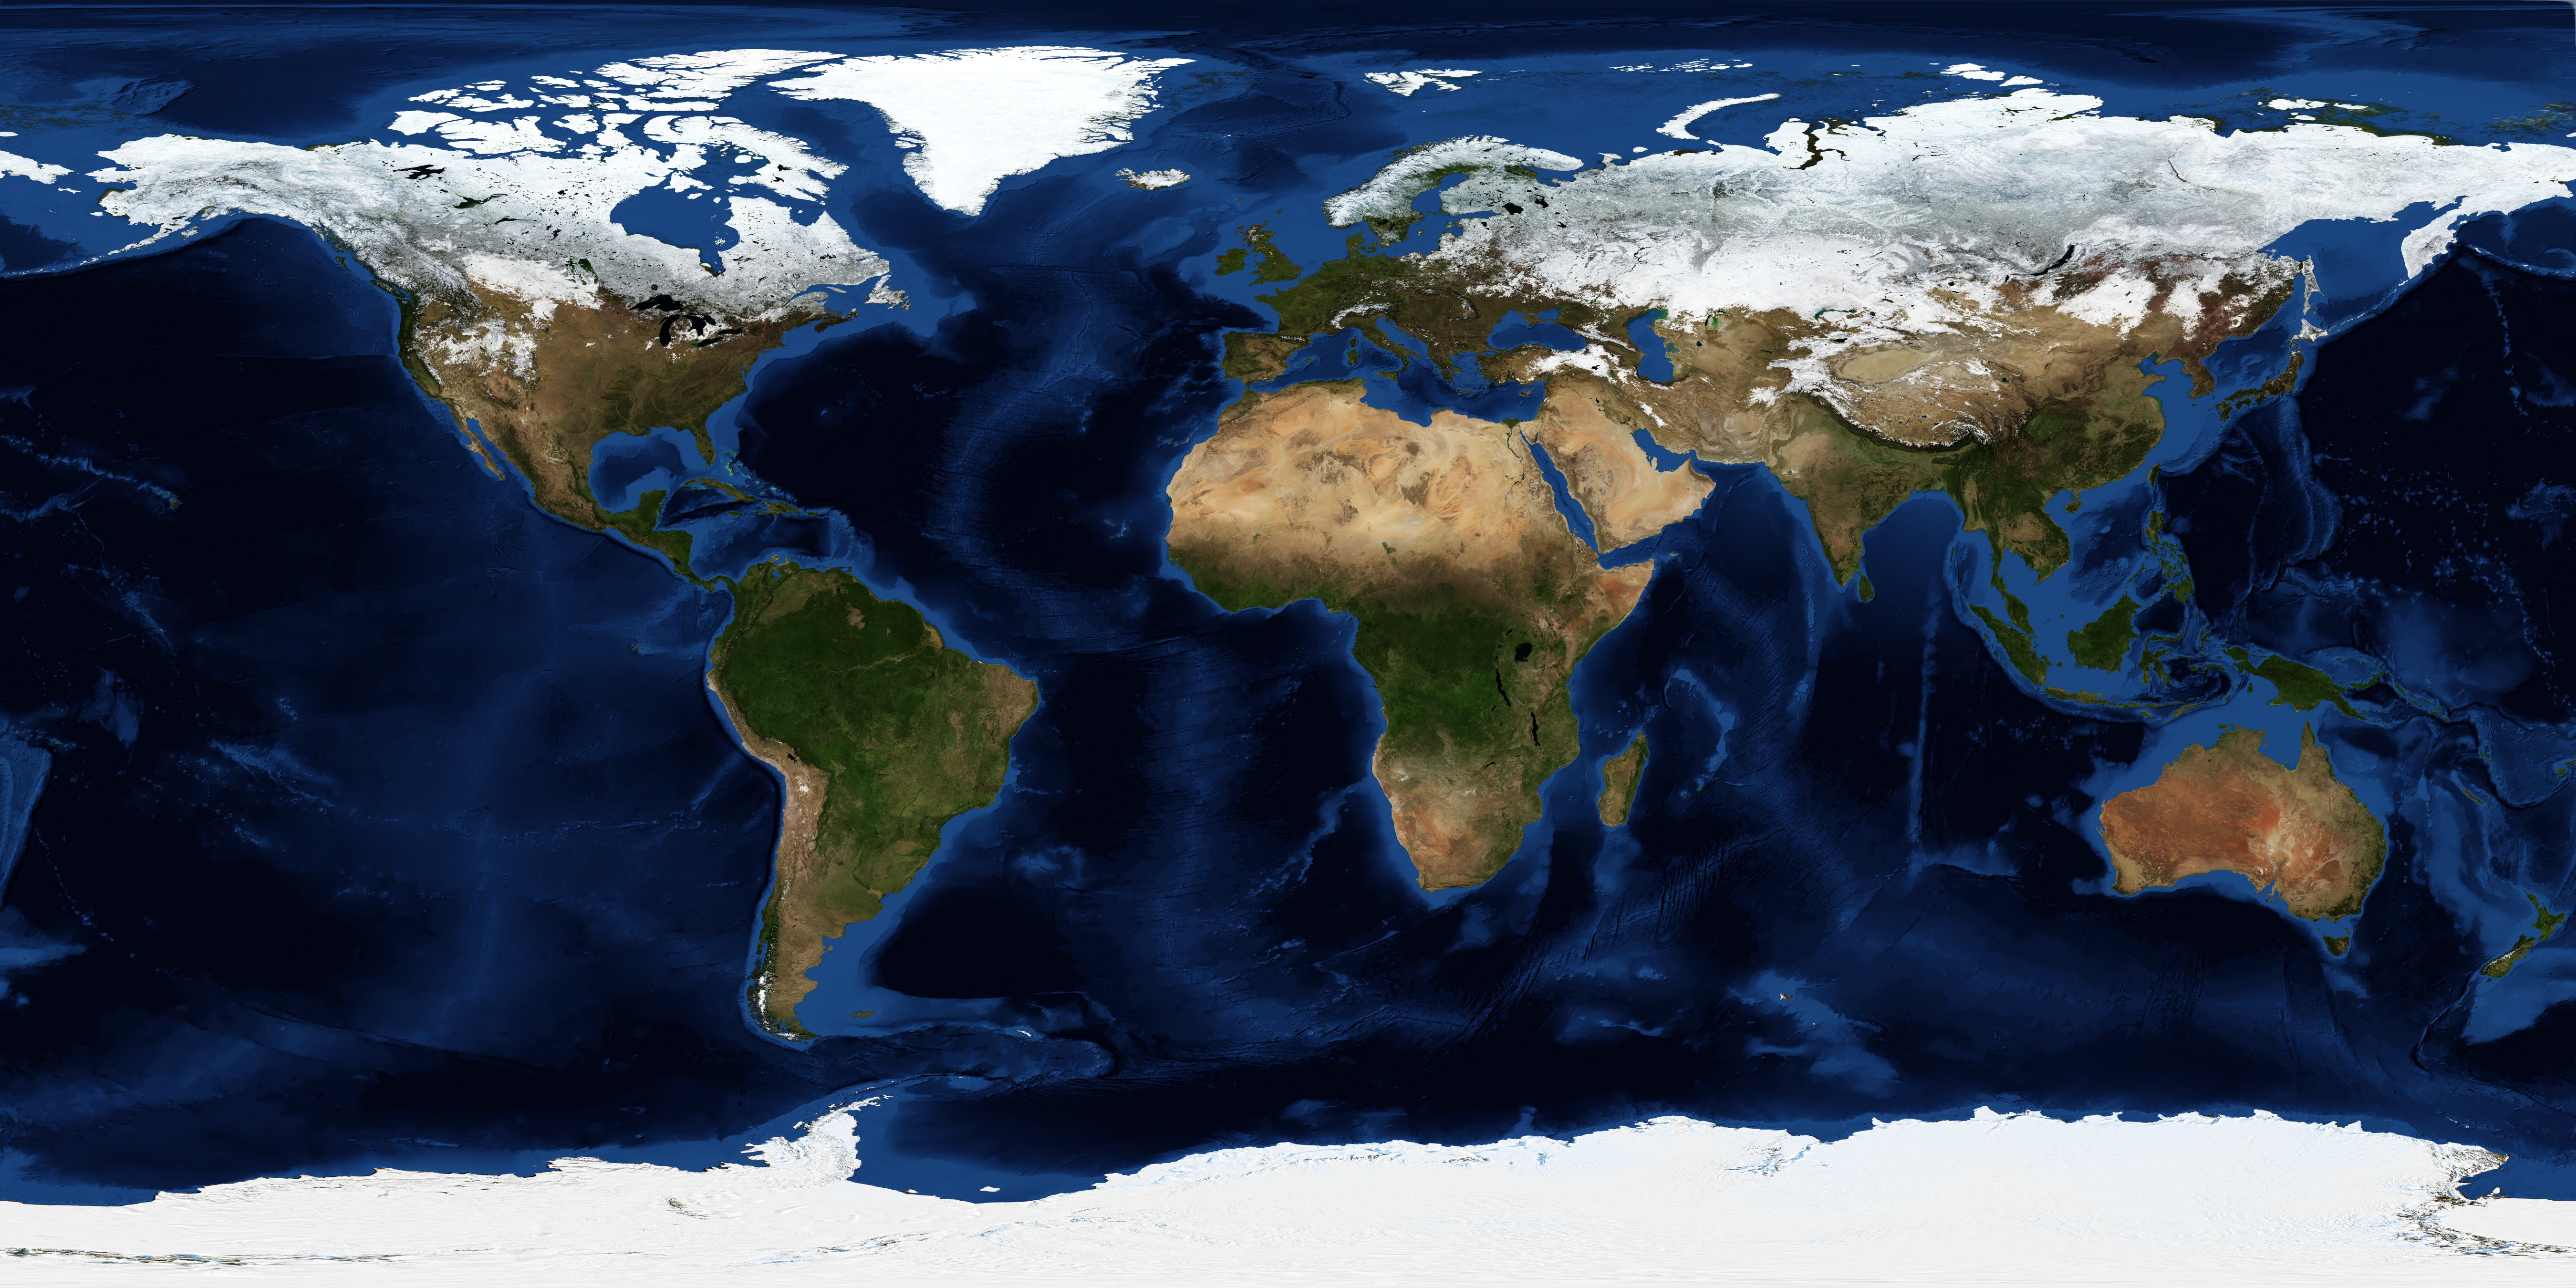 December, Blue Marble Next Generation w/ Topography and Bathymetry - related image preview